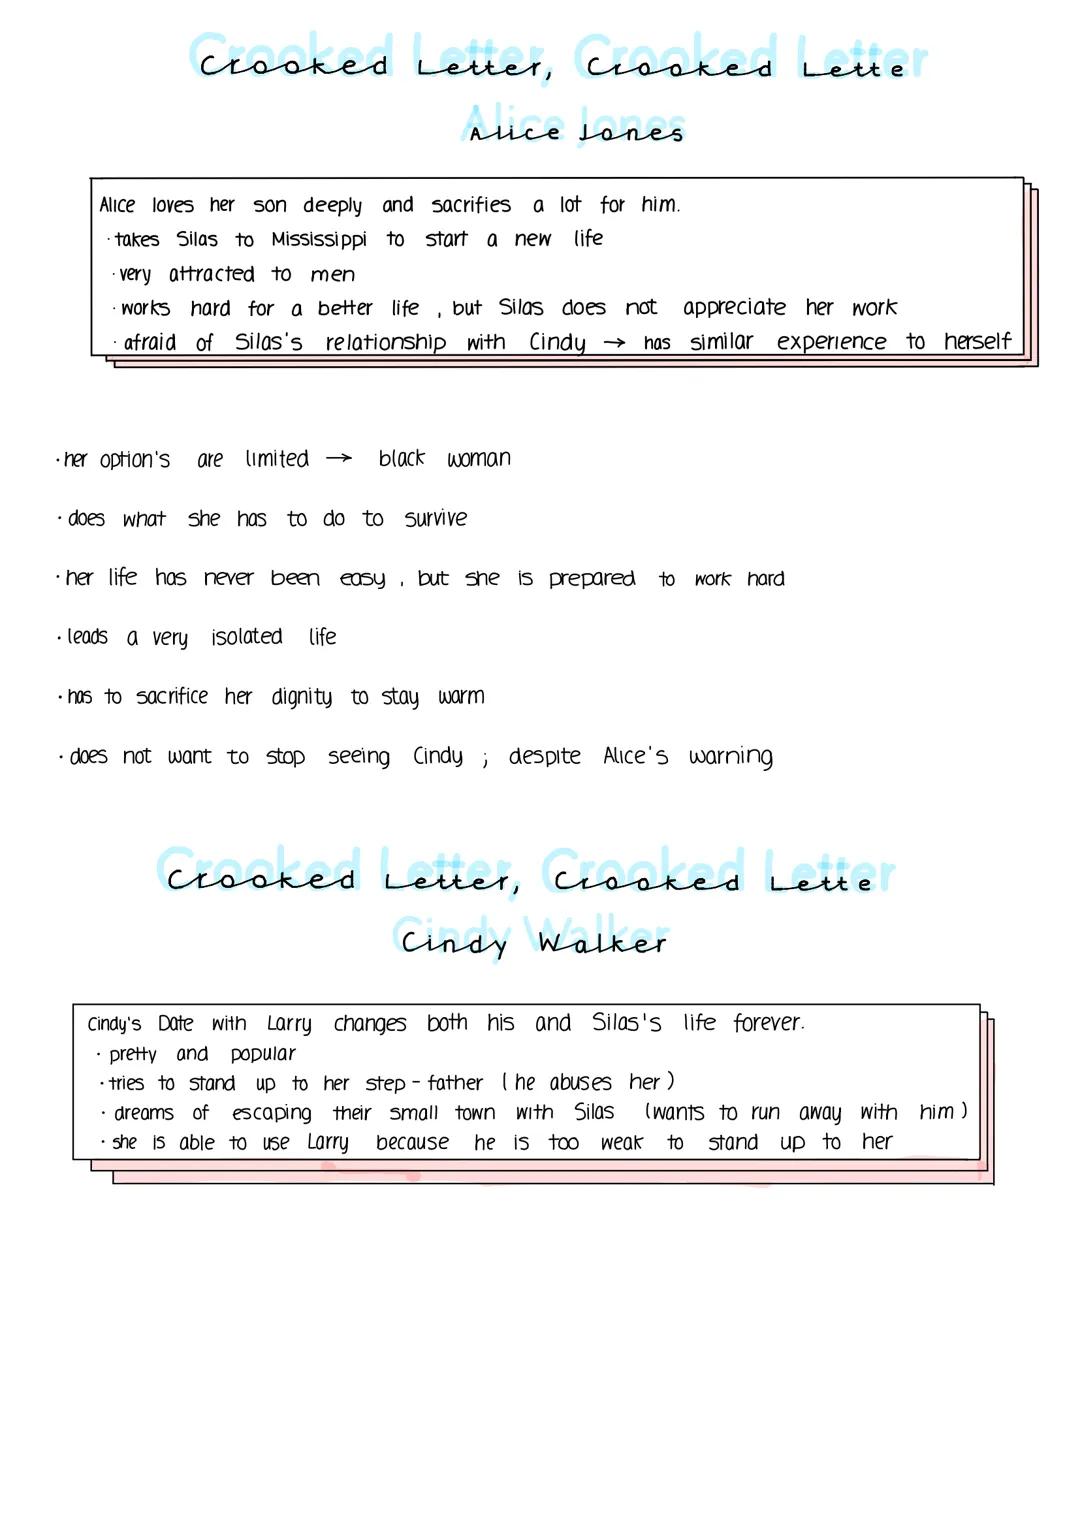 Crooked Letter, Crooked Letter
Larry att
Scary Larry" is an outsider who just want to be accepted.
· Larry's unusual hobbies make him a misf